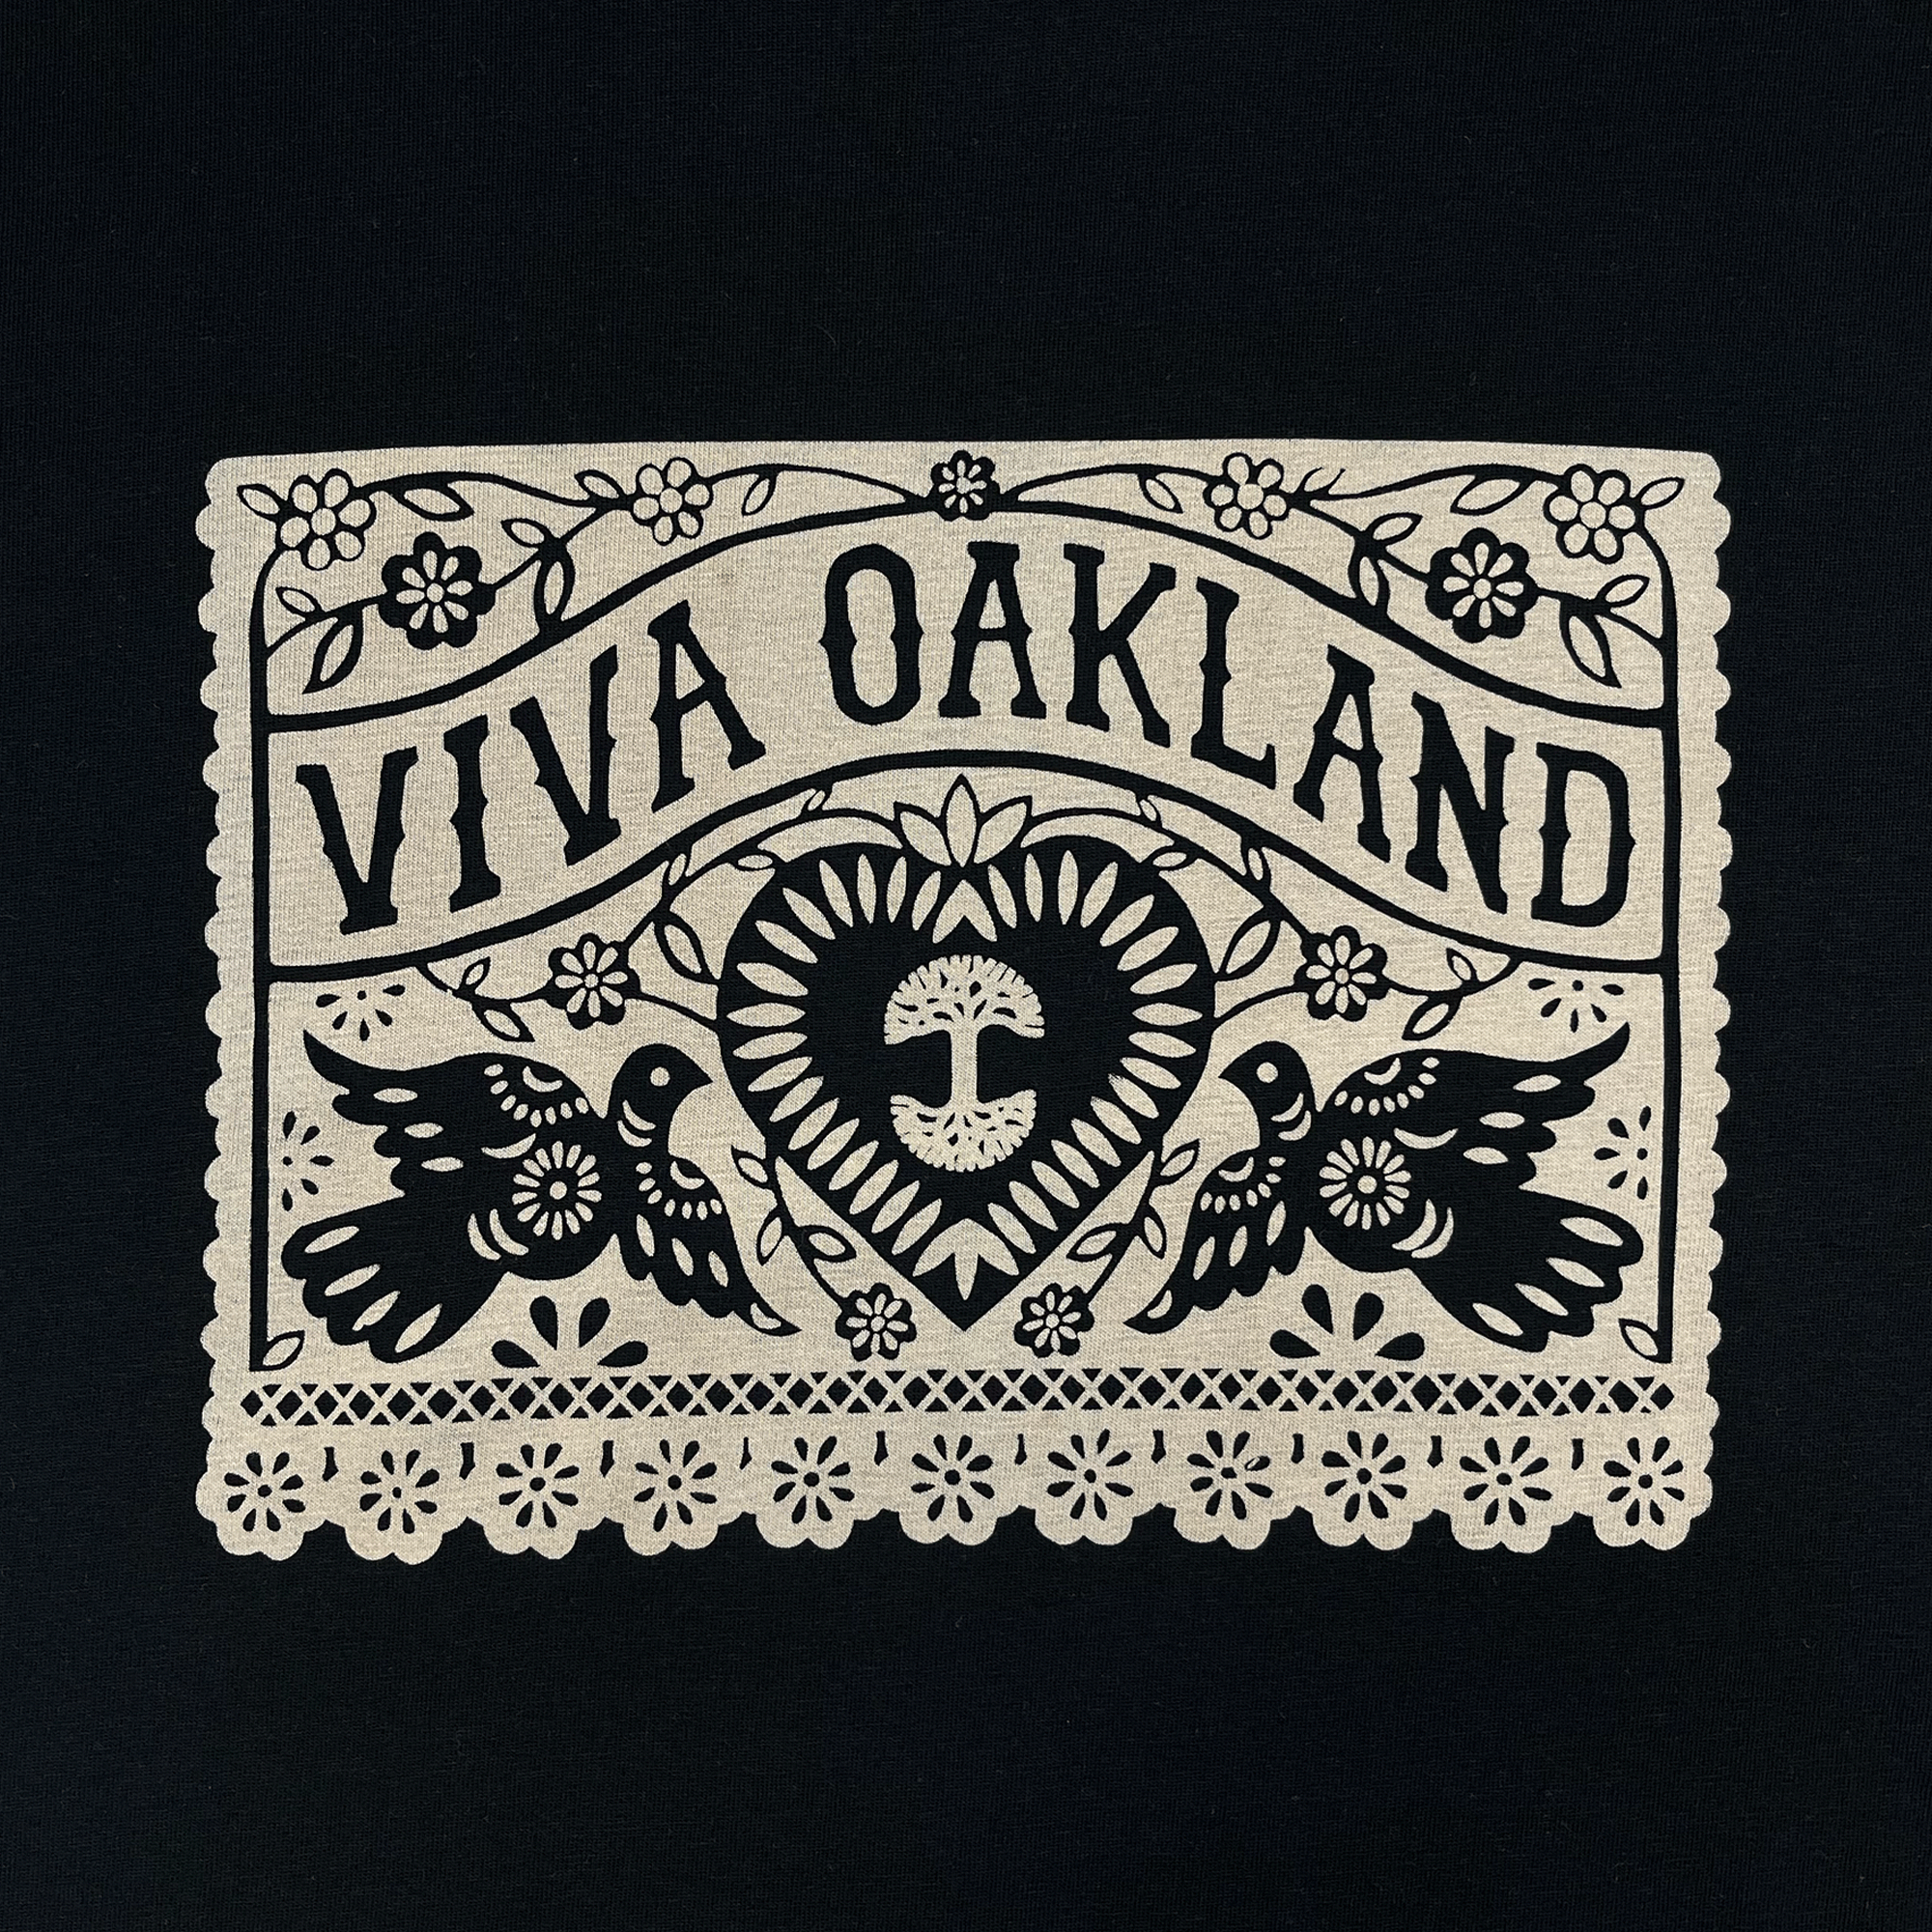 Close-up of intricate lace gold Viva Oakland graphic on the front chest of a black t-shirt.